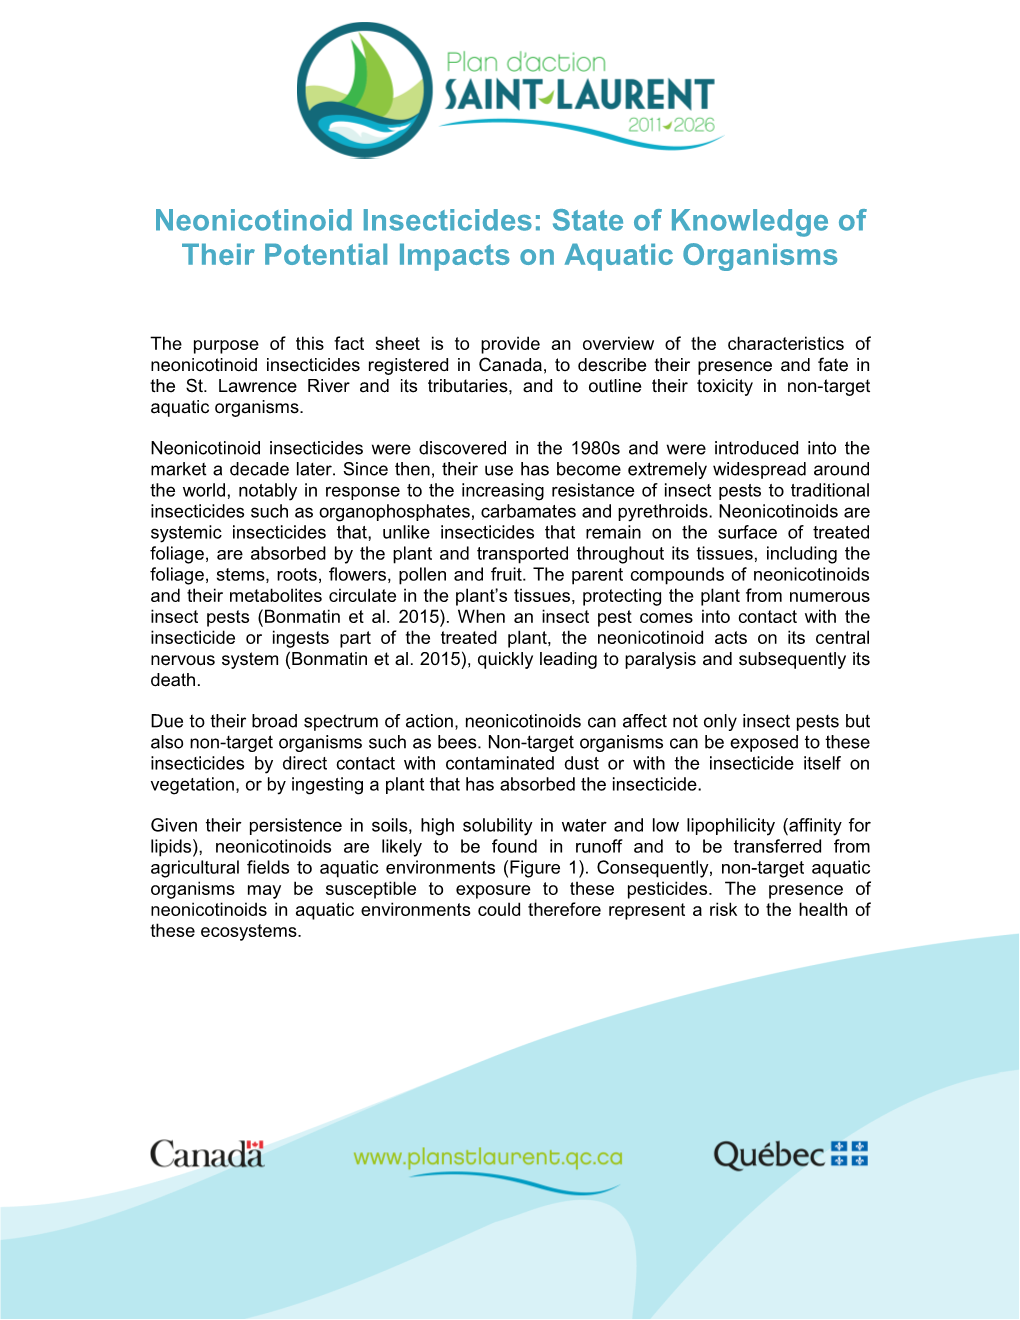 Neonicotinoid Insecticides: State of Knowledge of Their Potential Impacts on Aquatic Organisms